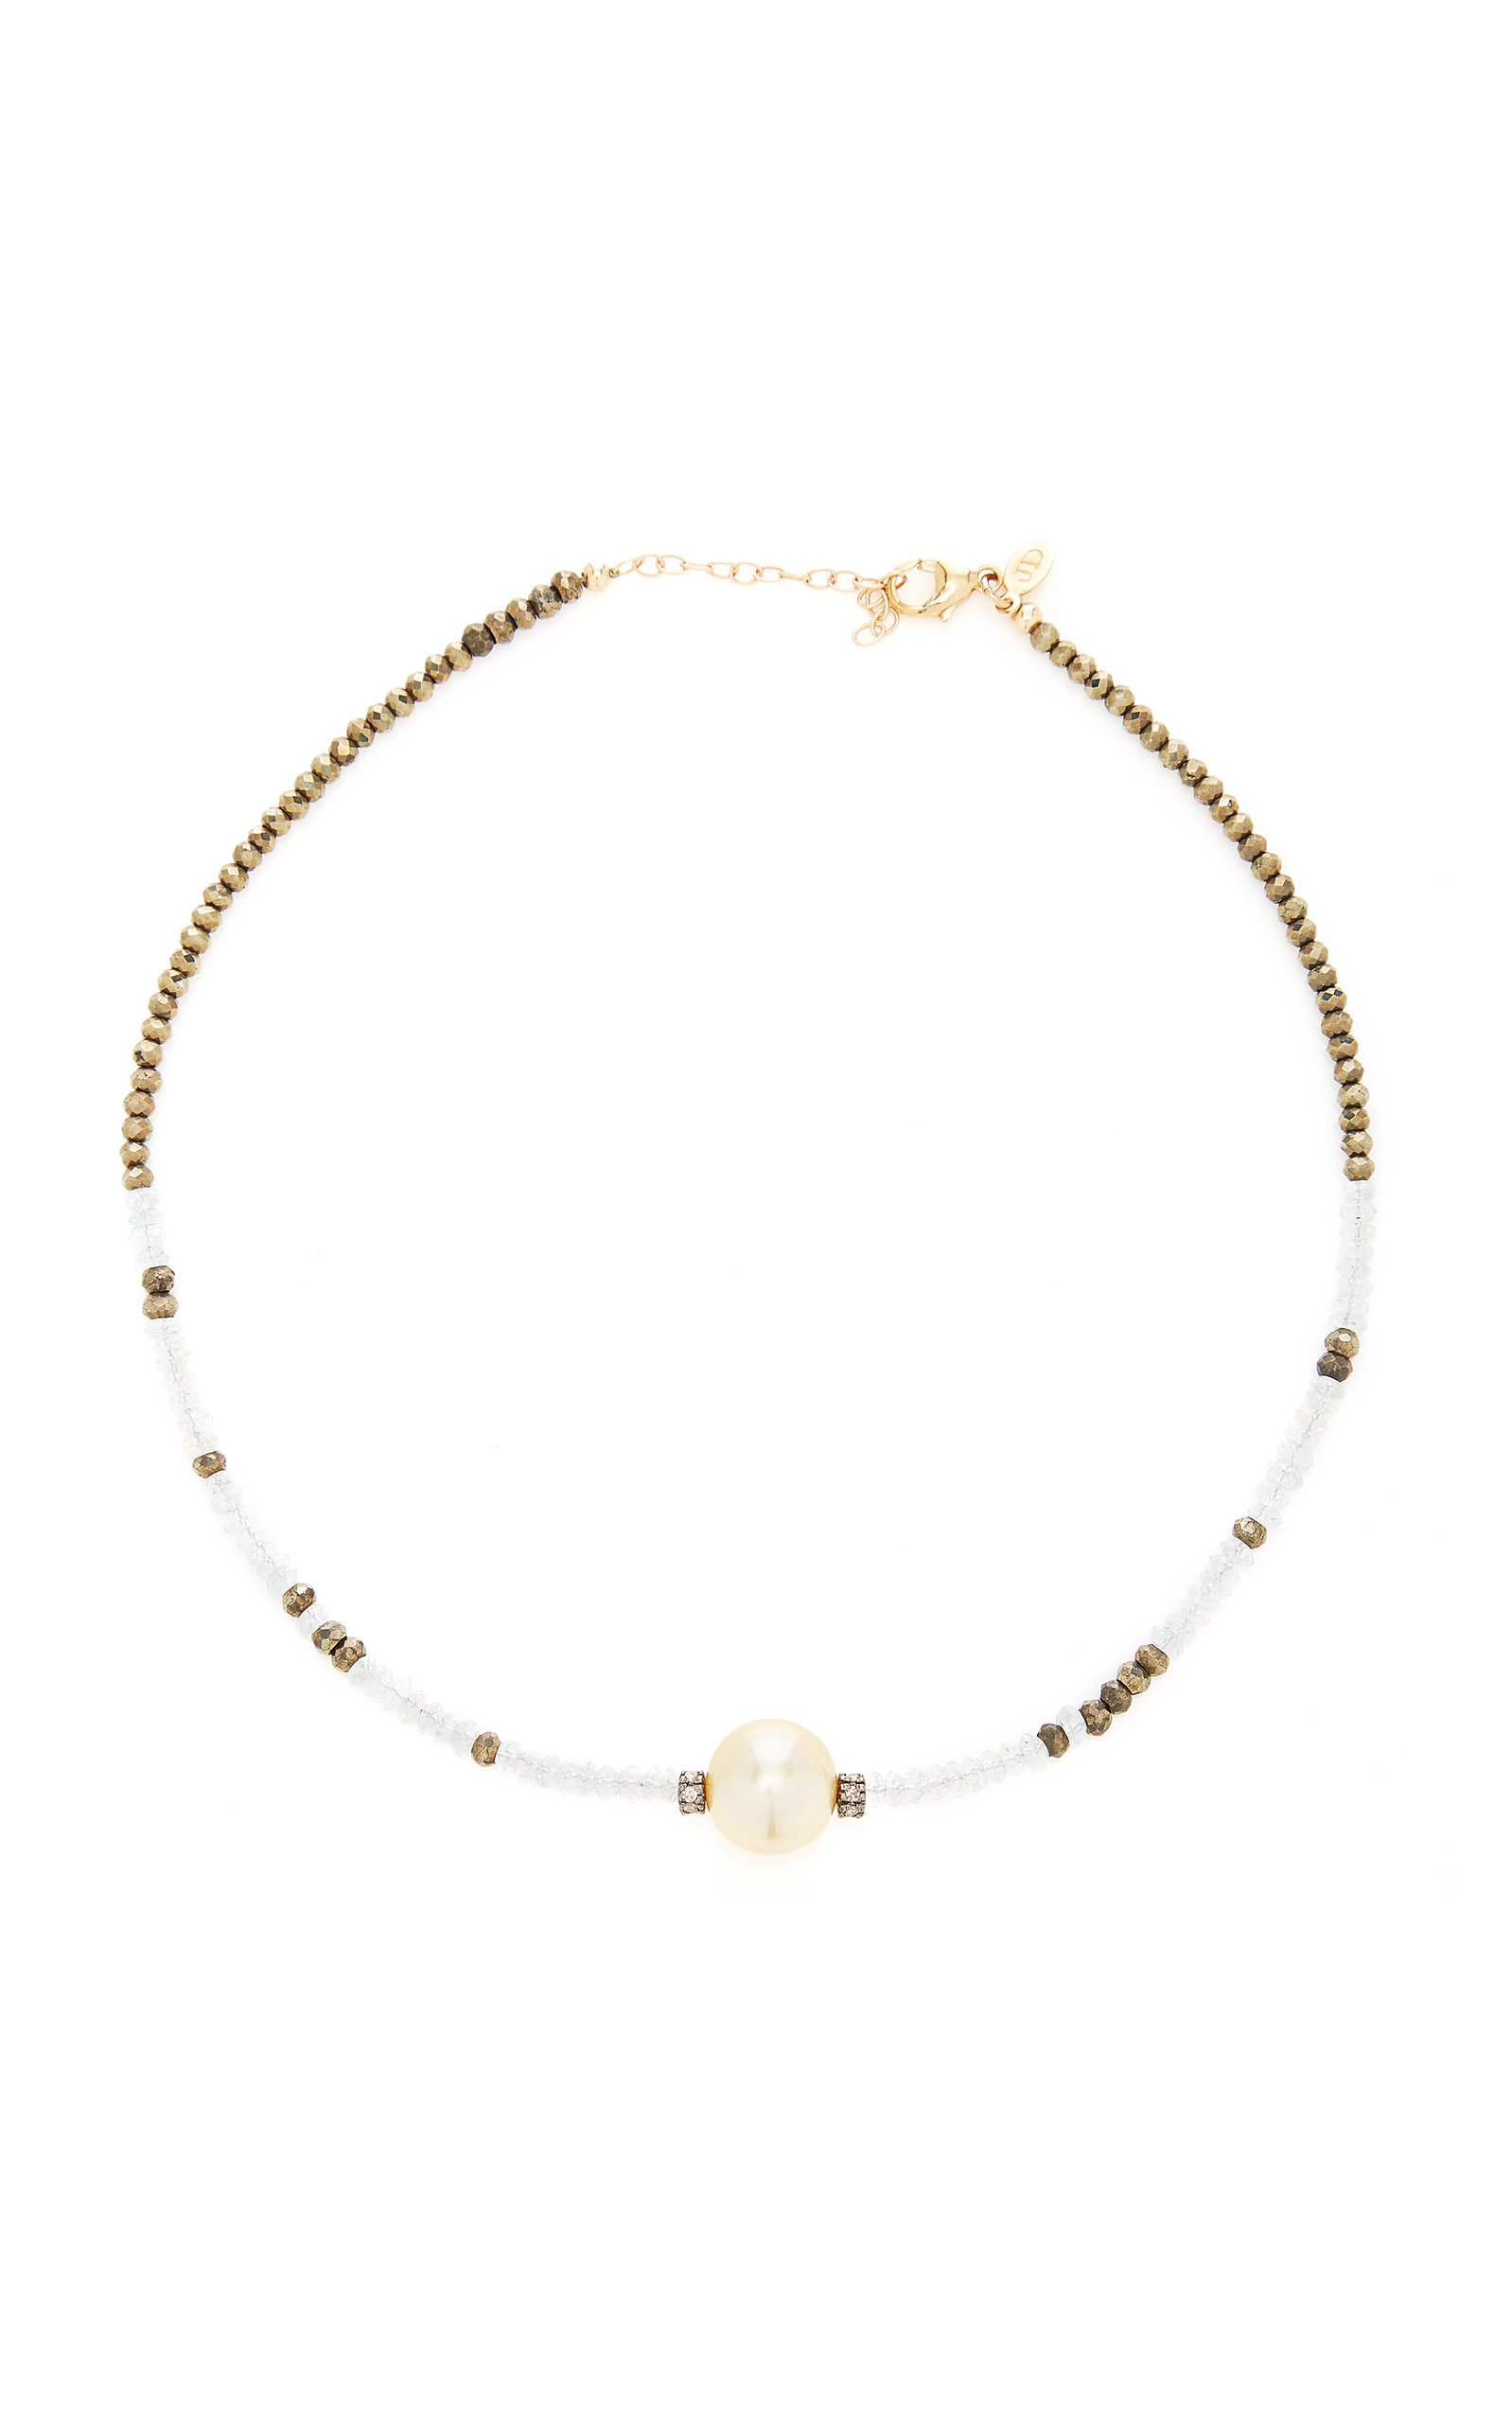 Joie DiGiovanni Women's 14K Gold; Aquamarine; Pyrite and Pearl Necklace